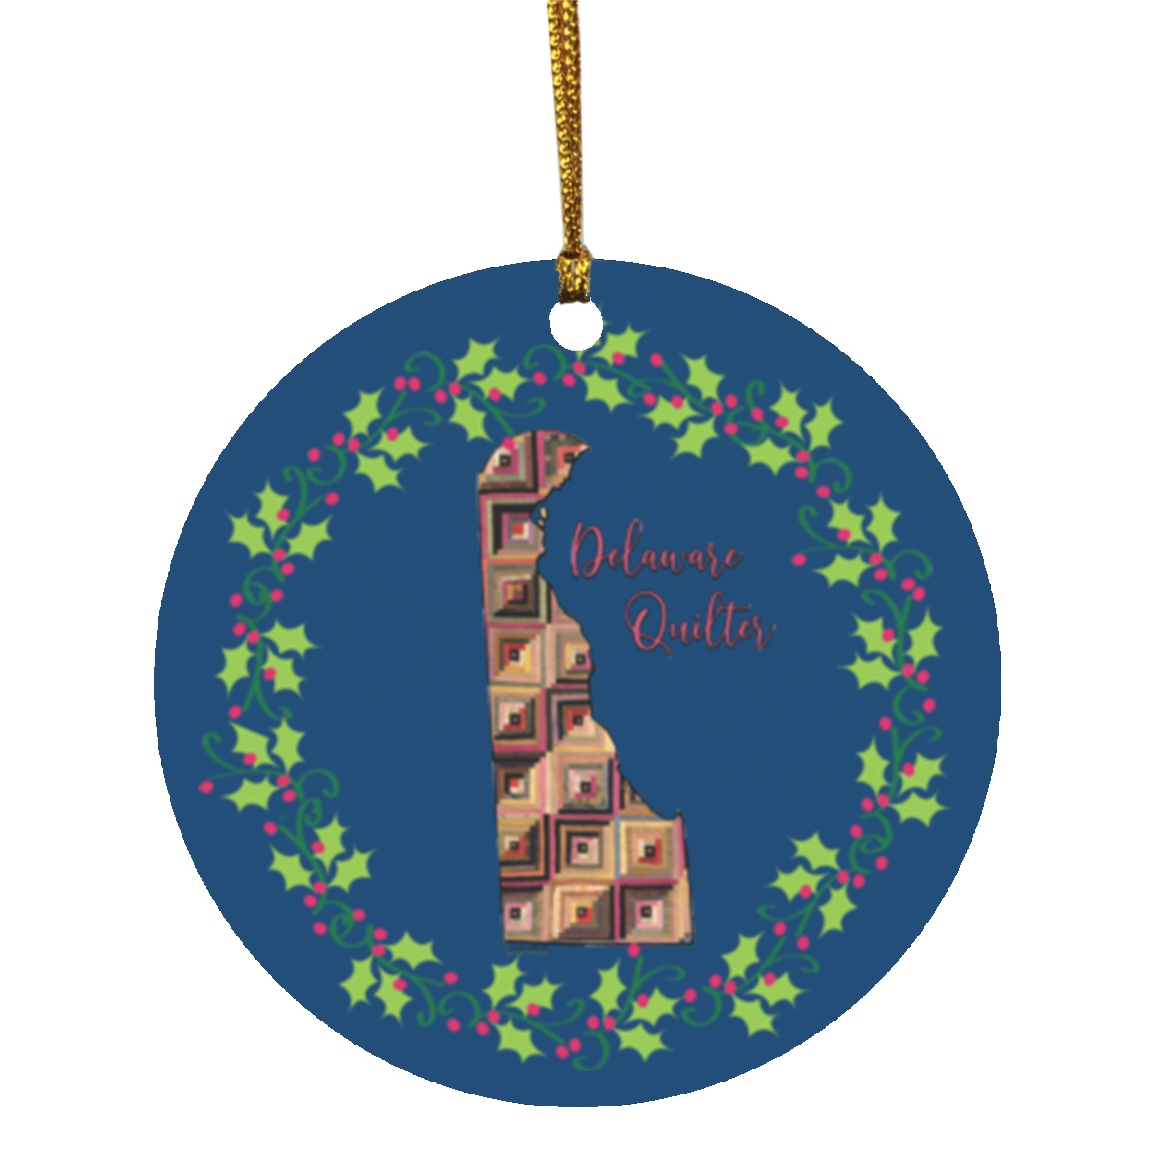 Delaware Quilter Christmas Circle Ornament